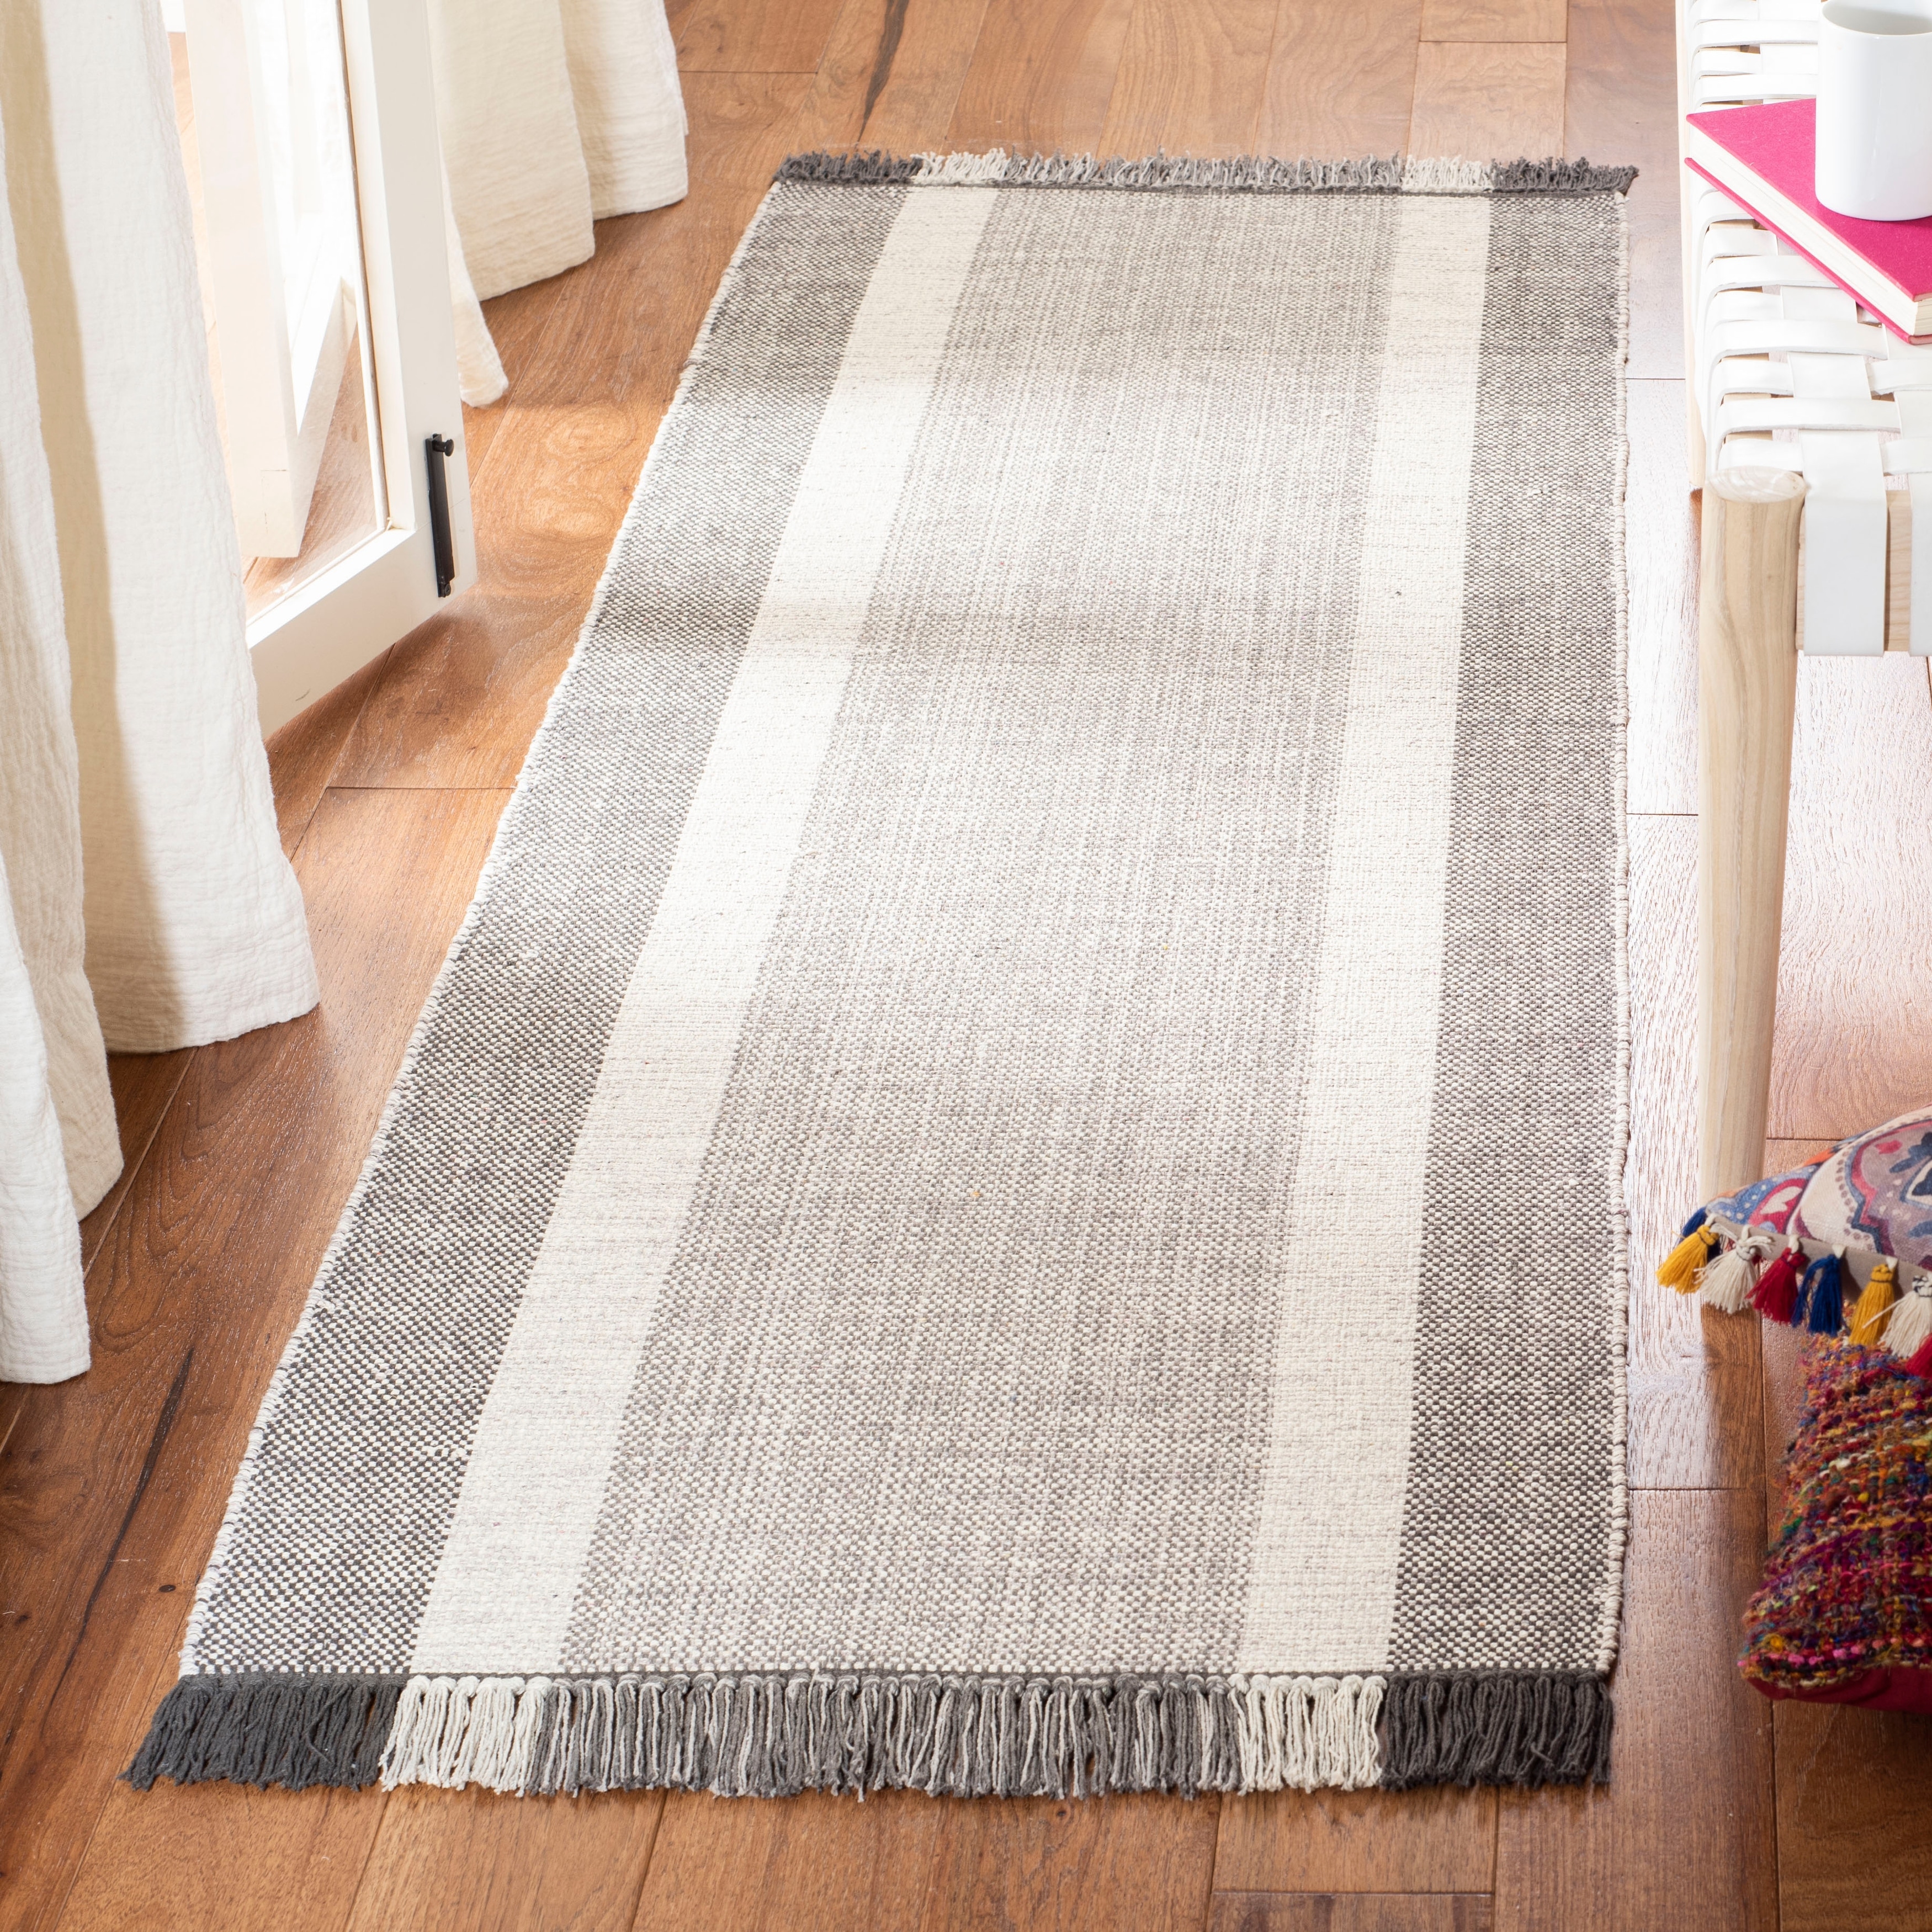 Black and White Striped Rug / Doormat Layering Rug / Small Accent Rug /  Boho Area Rug / Layered Doormat / Modern Doormat / Outdoor Entry Rug 